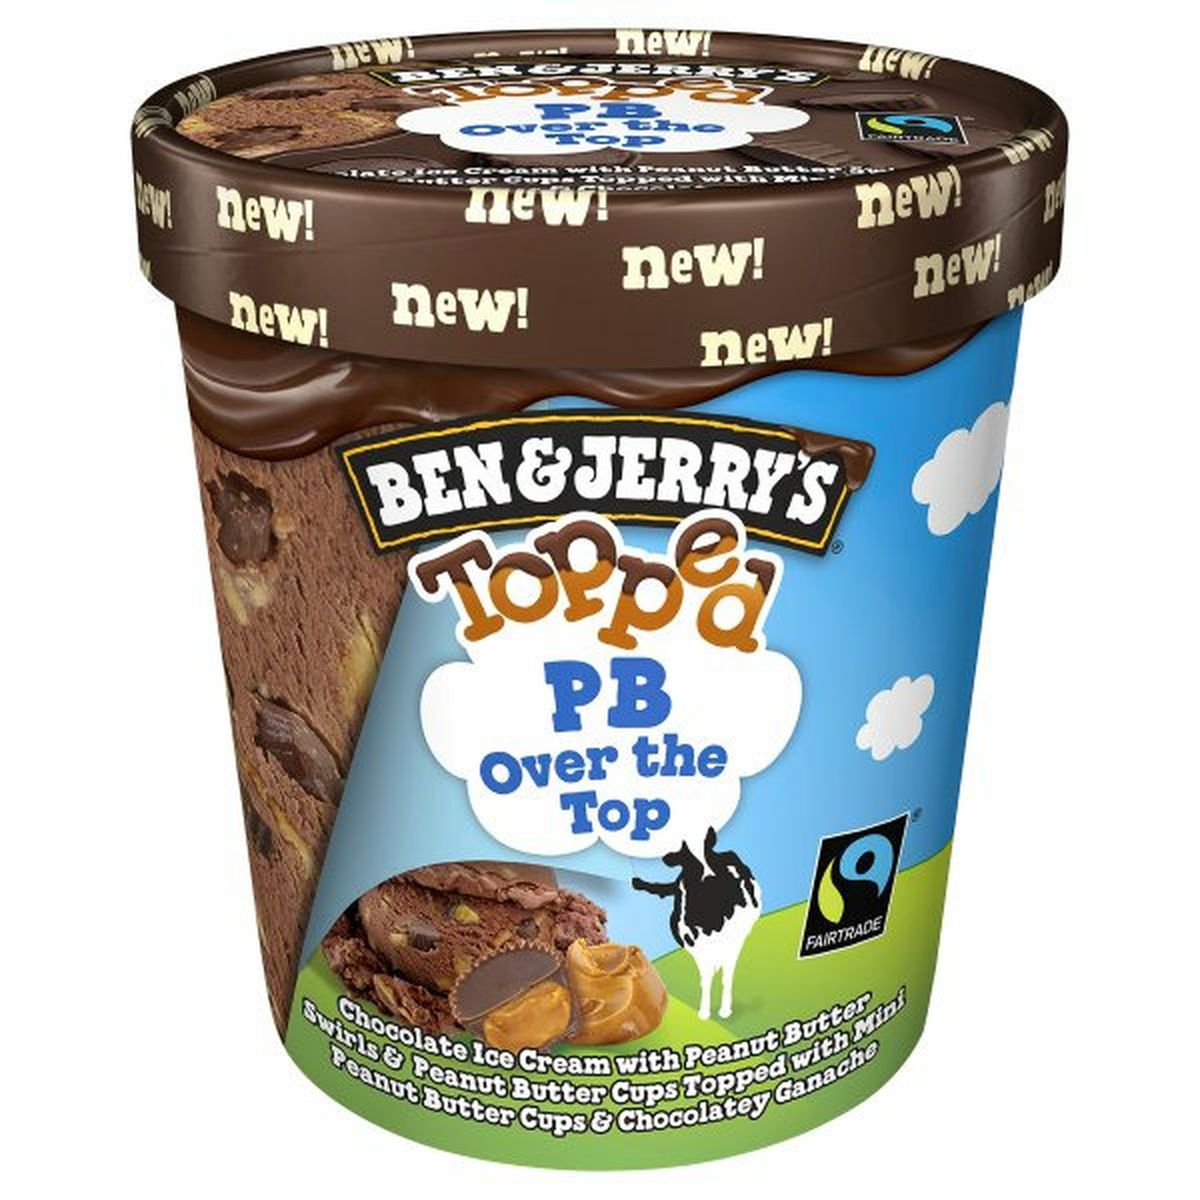 Calories in Ben & Jerry's Topped Ice Cream, Chocolate Peanut Butter